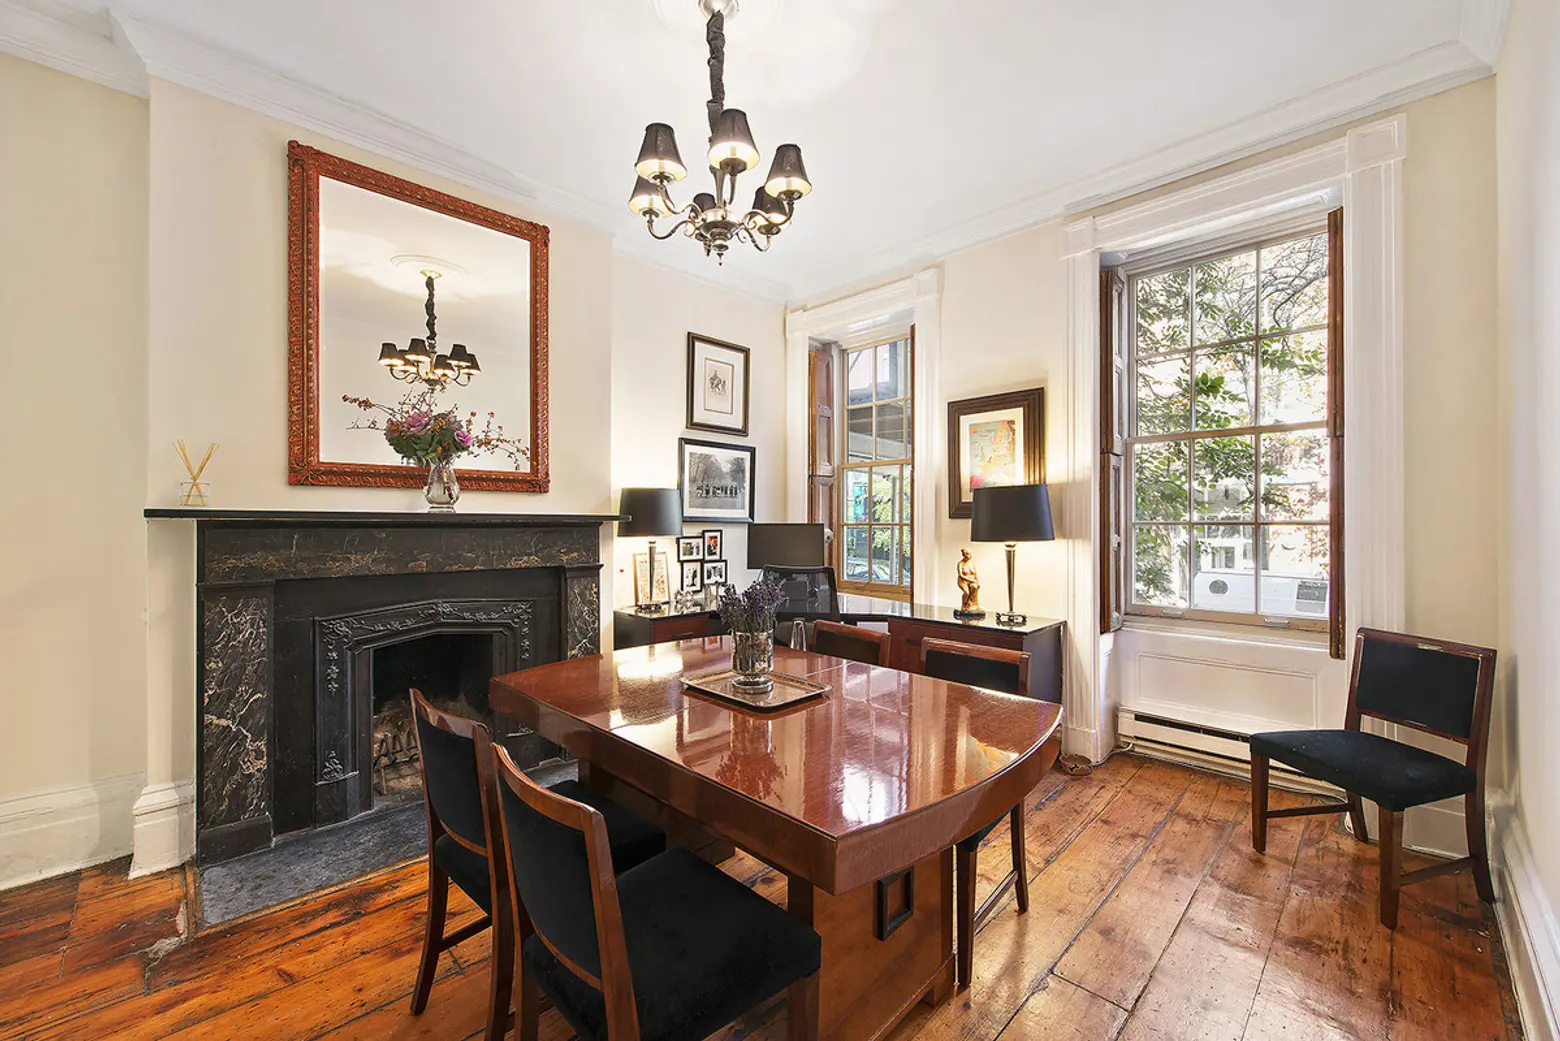 You’ll Be Drawn to This Duplex Rental’s Four Fireplaces Like Moths to a Flame